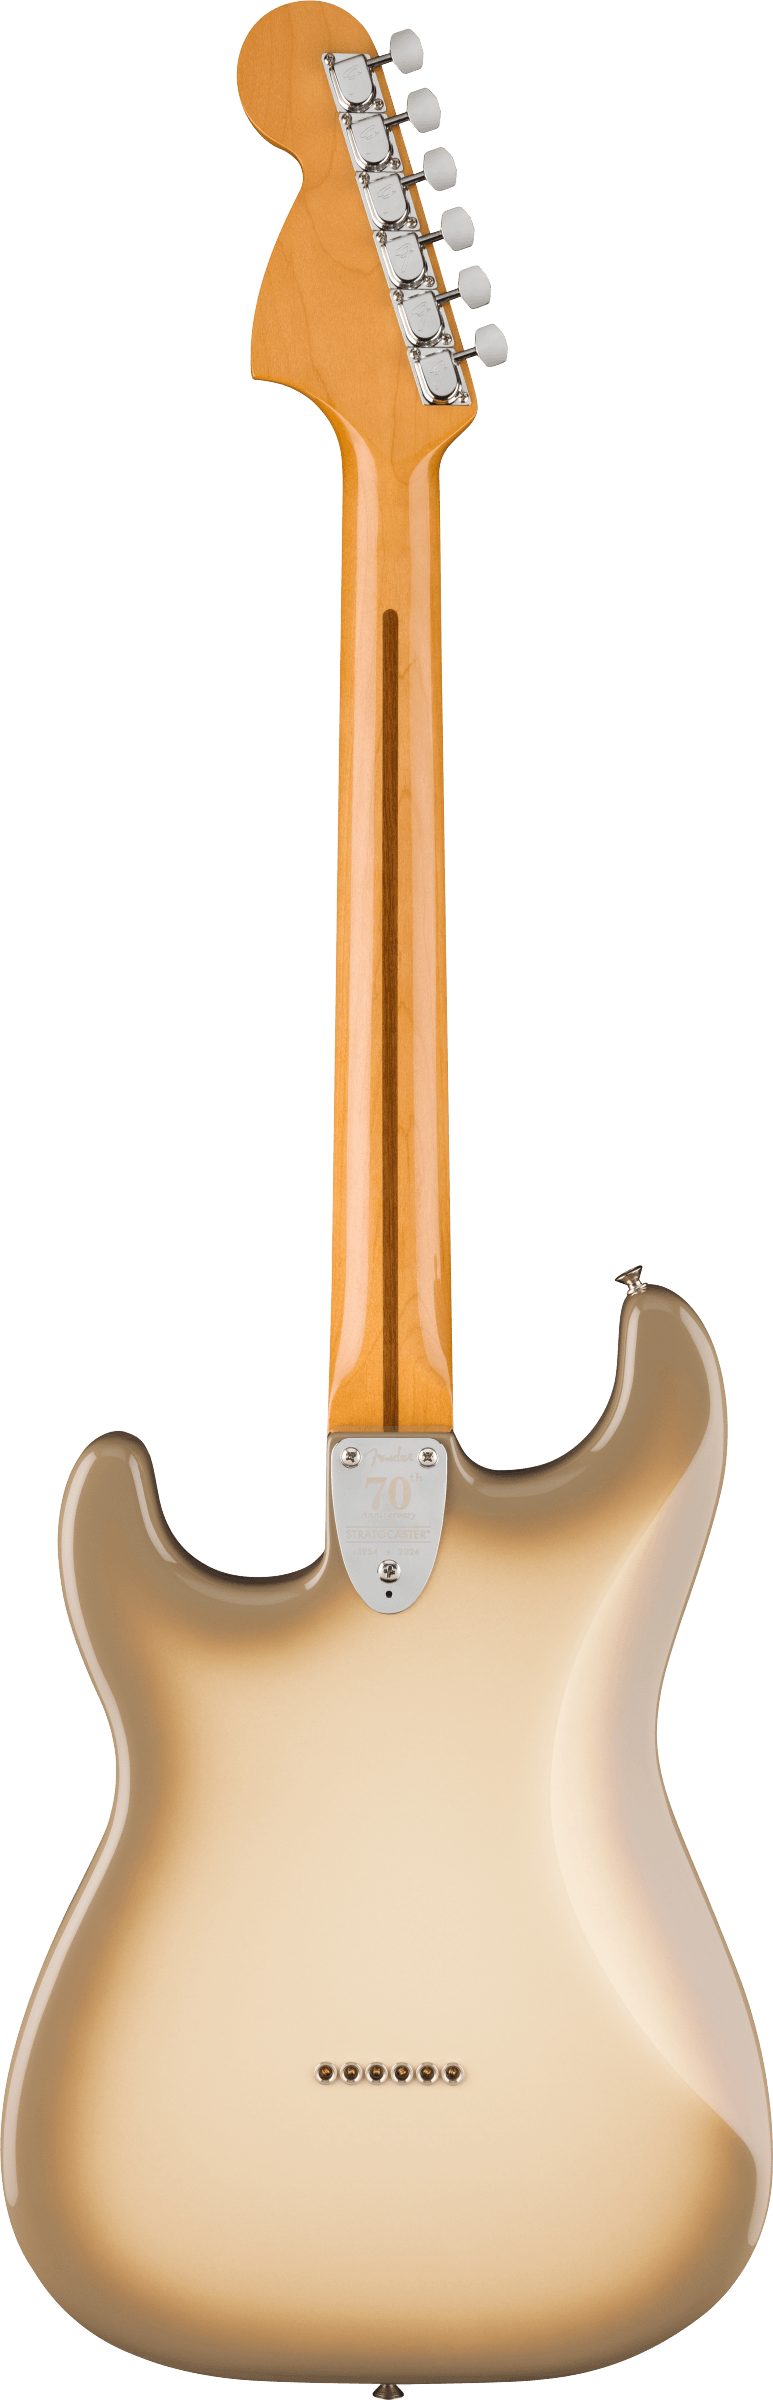 Back of Fender 70th Anniversary Antigua Stratocaster Rosewood Fingerboard Antigua.